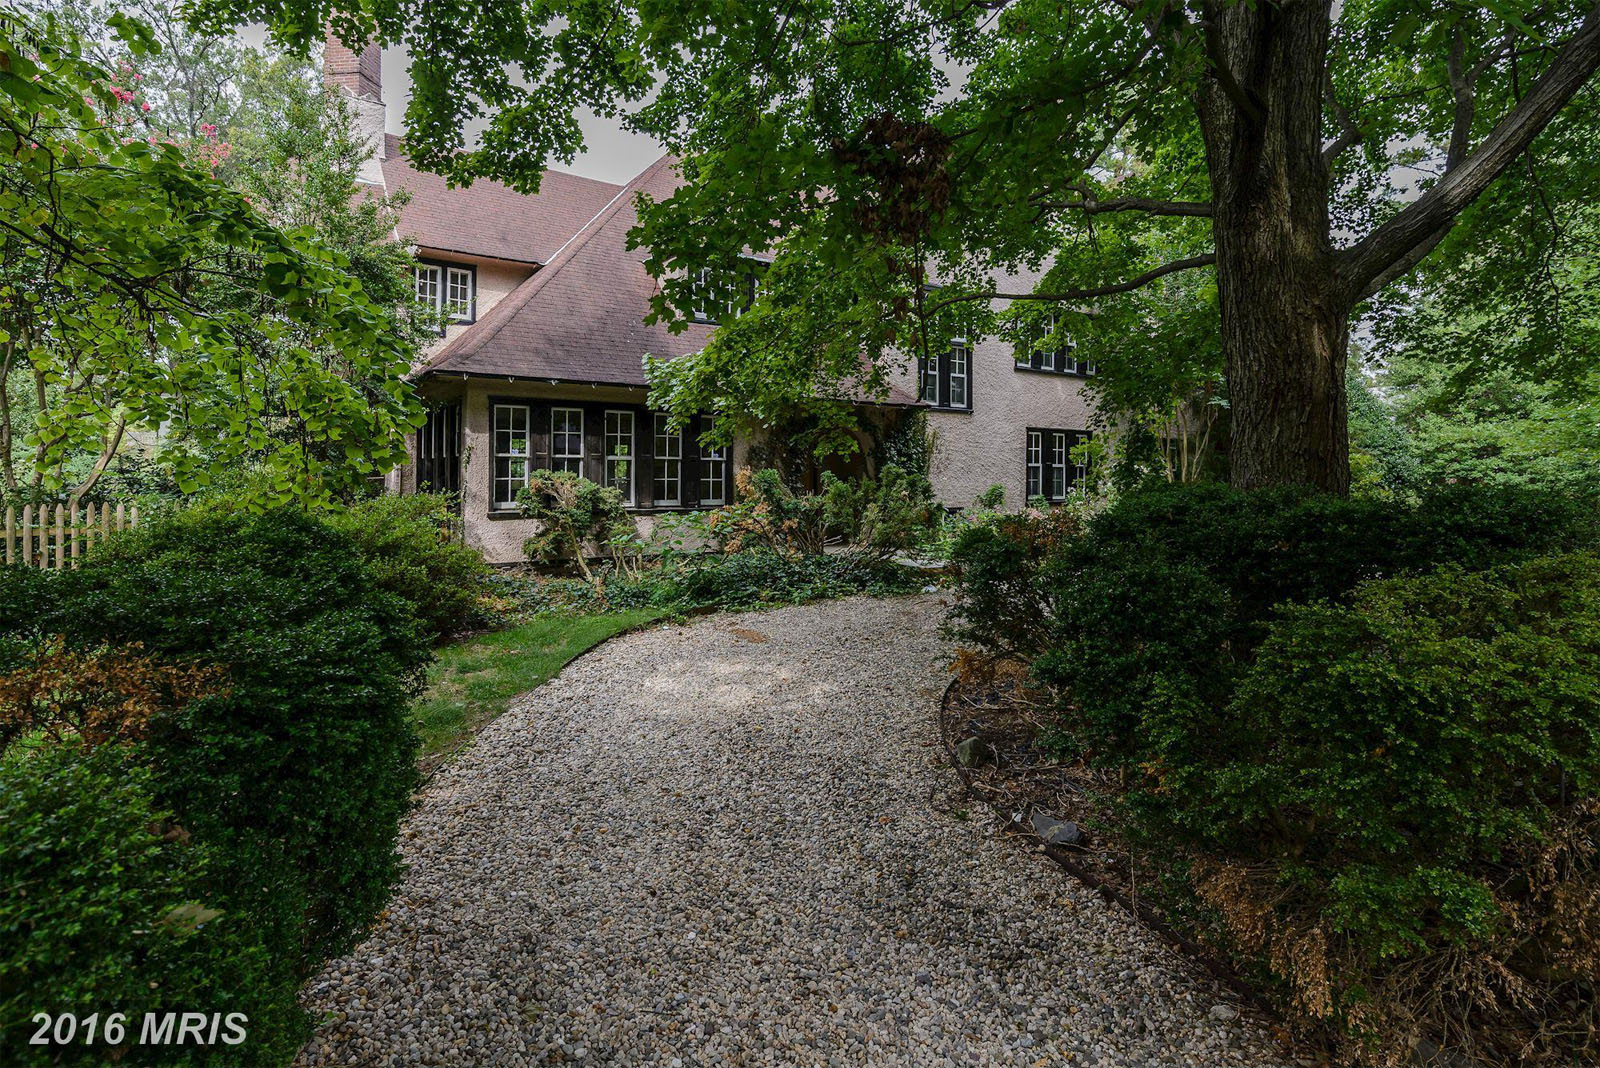 2. $5,350,000 
The 1918 Bethesda Tudor has eight bedrooms, four bathrooms and two half baths. (MRIS)